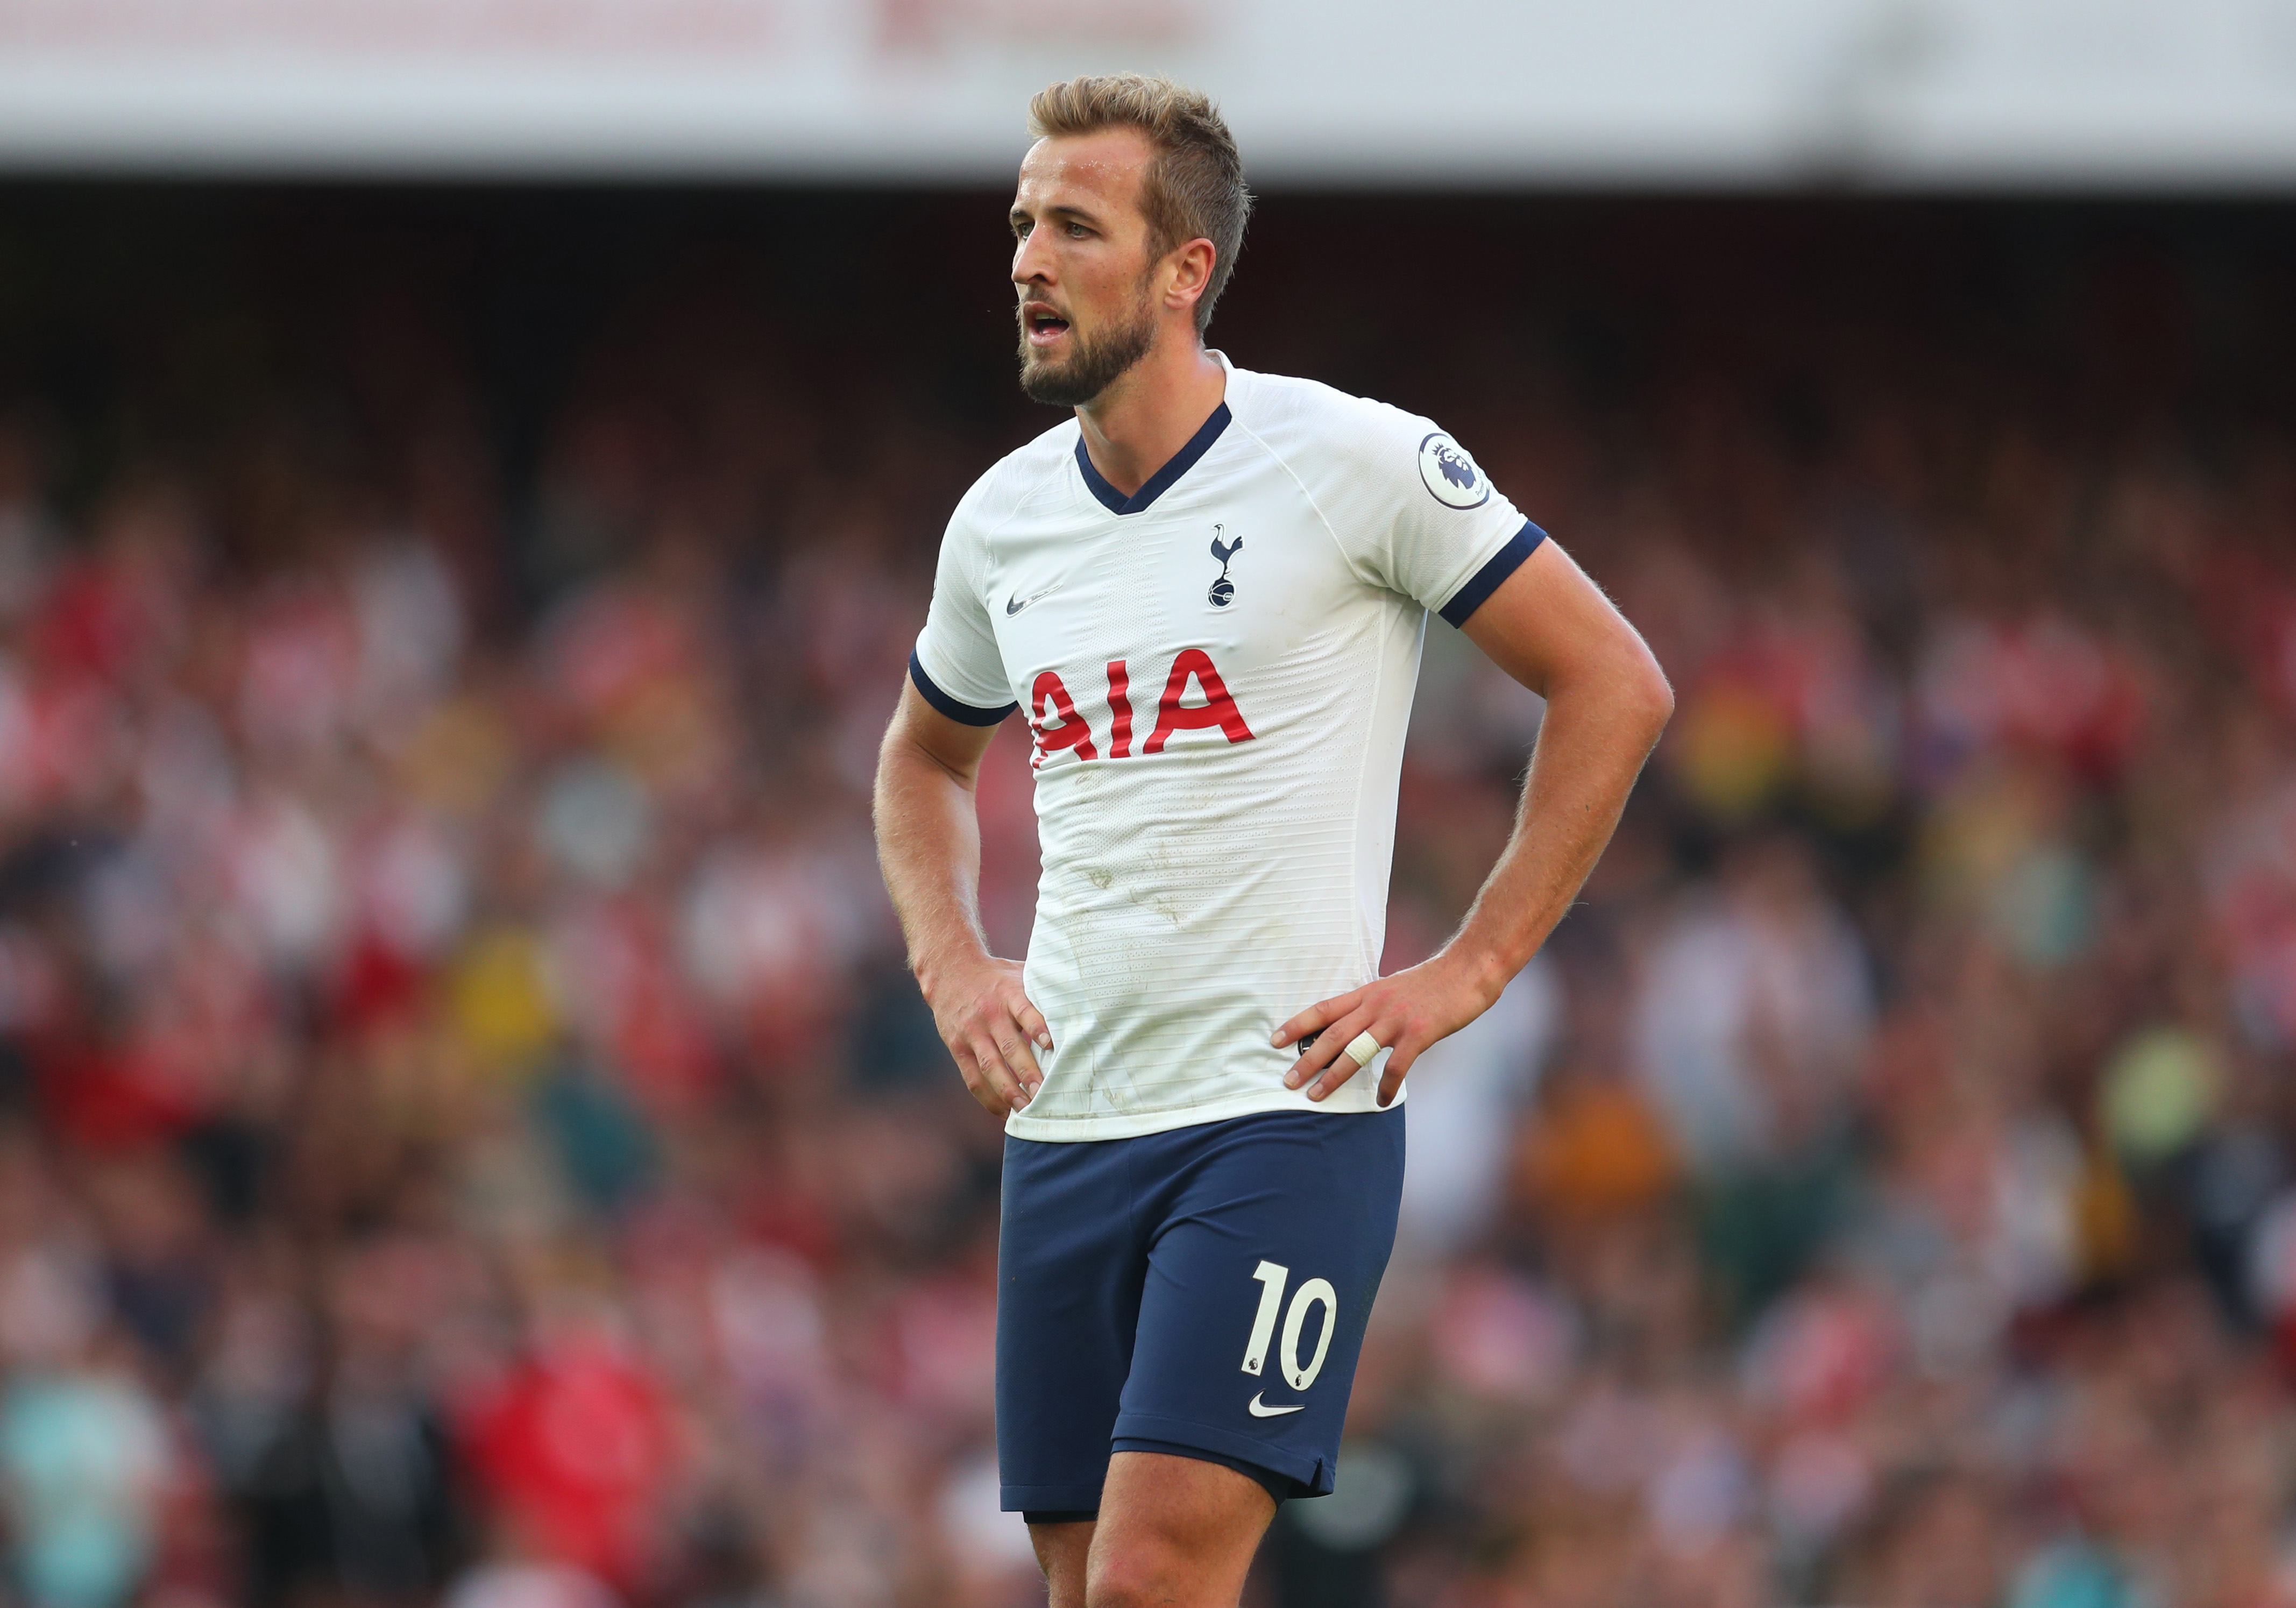 Will Kane secure a big move to Manchester City or United? (Photo by Catherine Ivill/Getty Images)